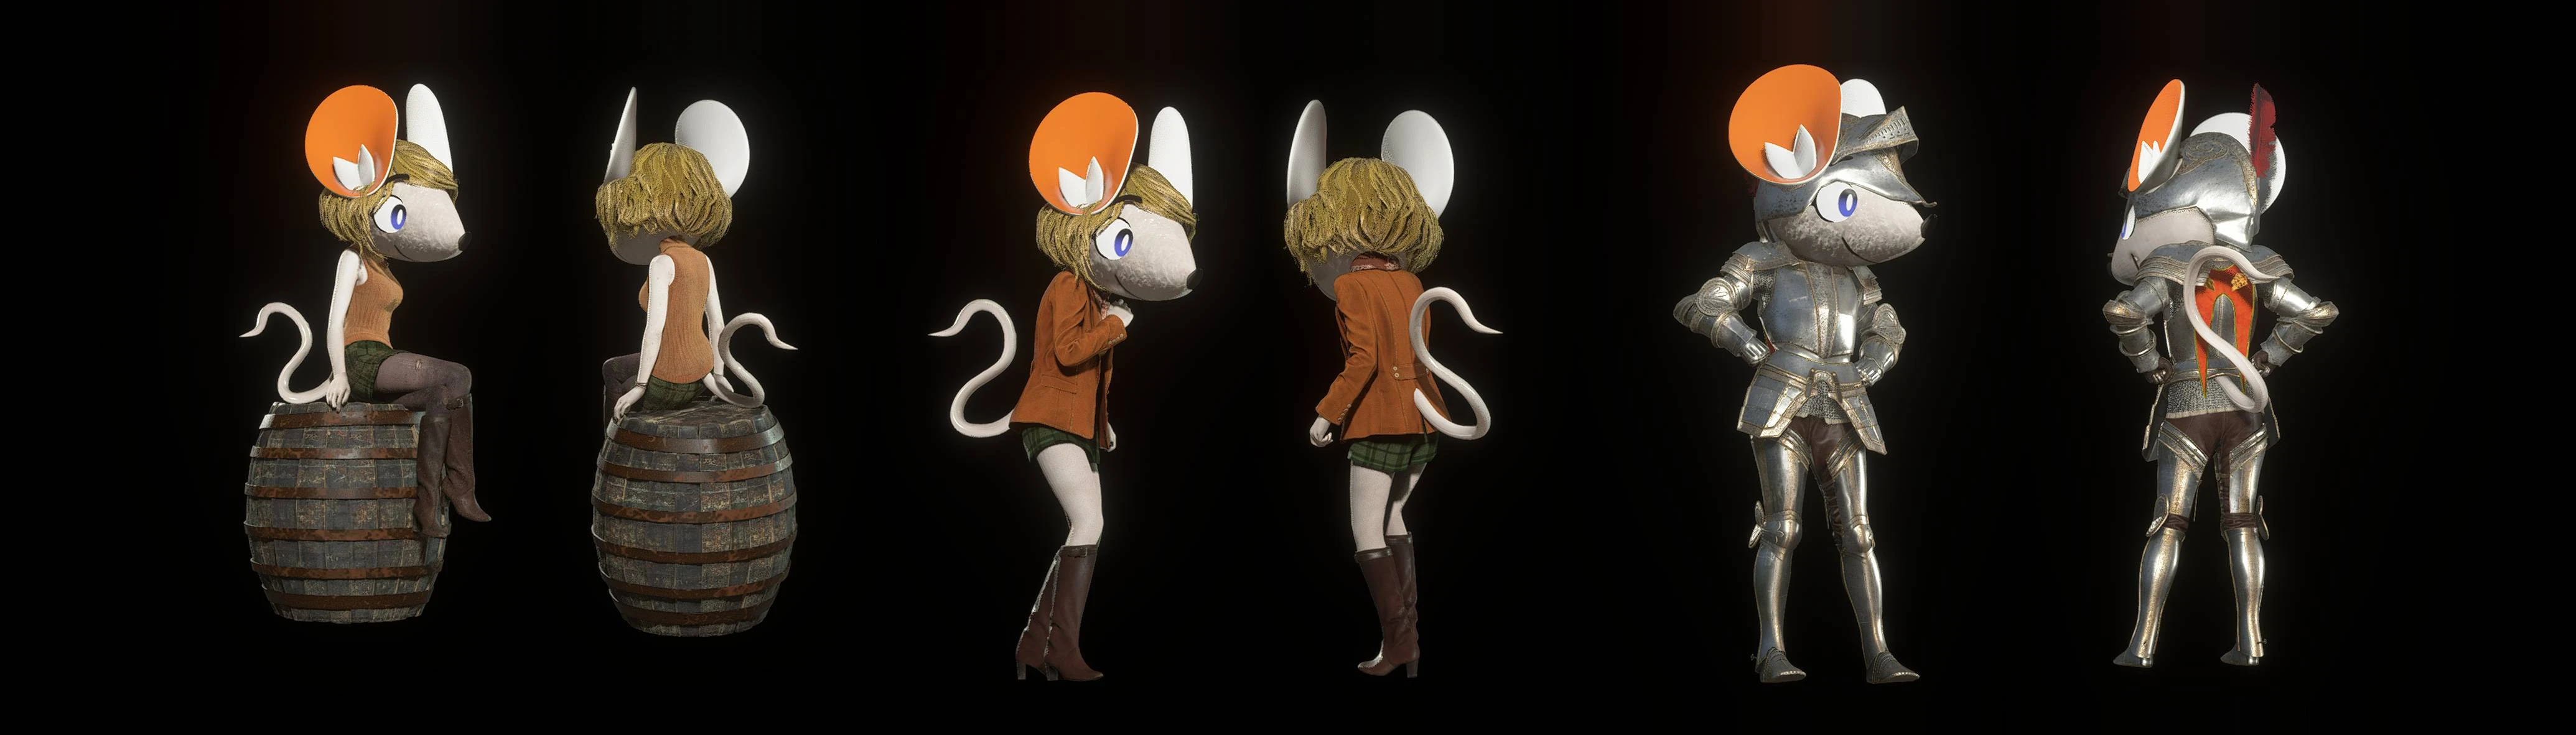 Ashley From Resident Evil Is A Mouse 